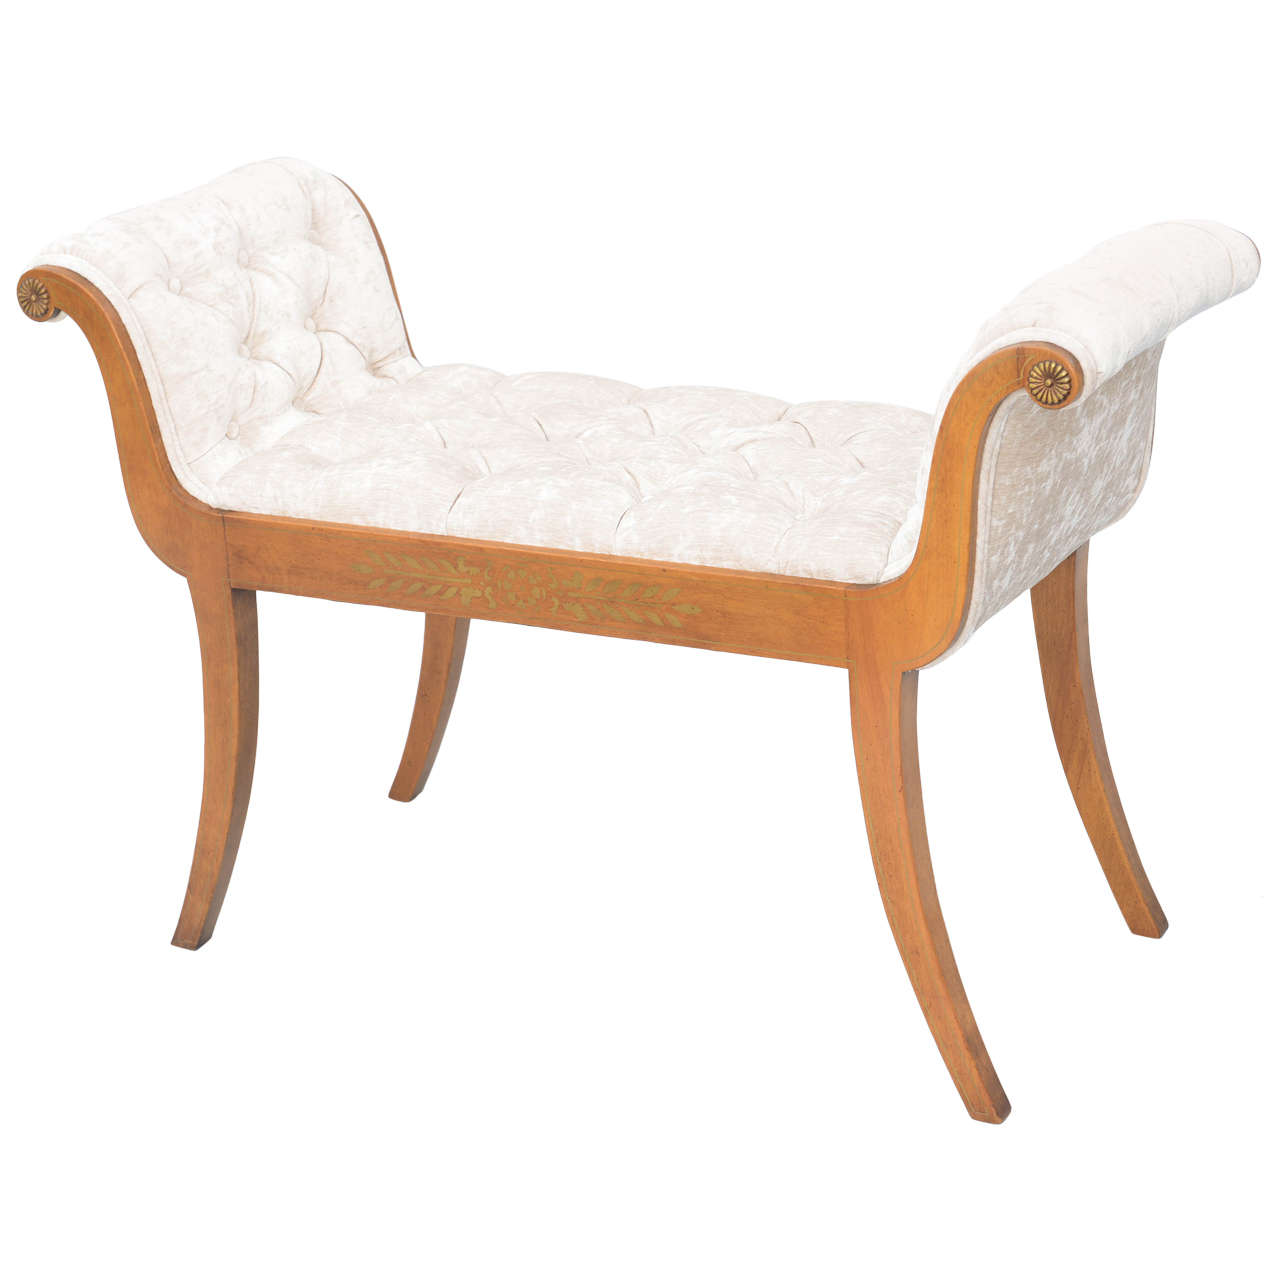 Satinwood Rolled Arm Window Seat Bench